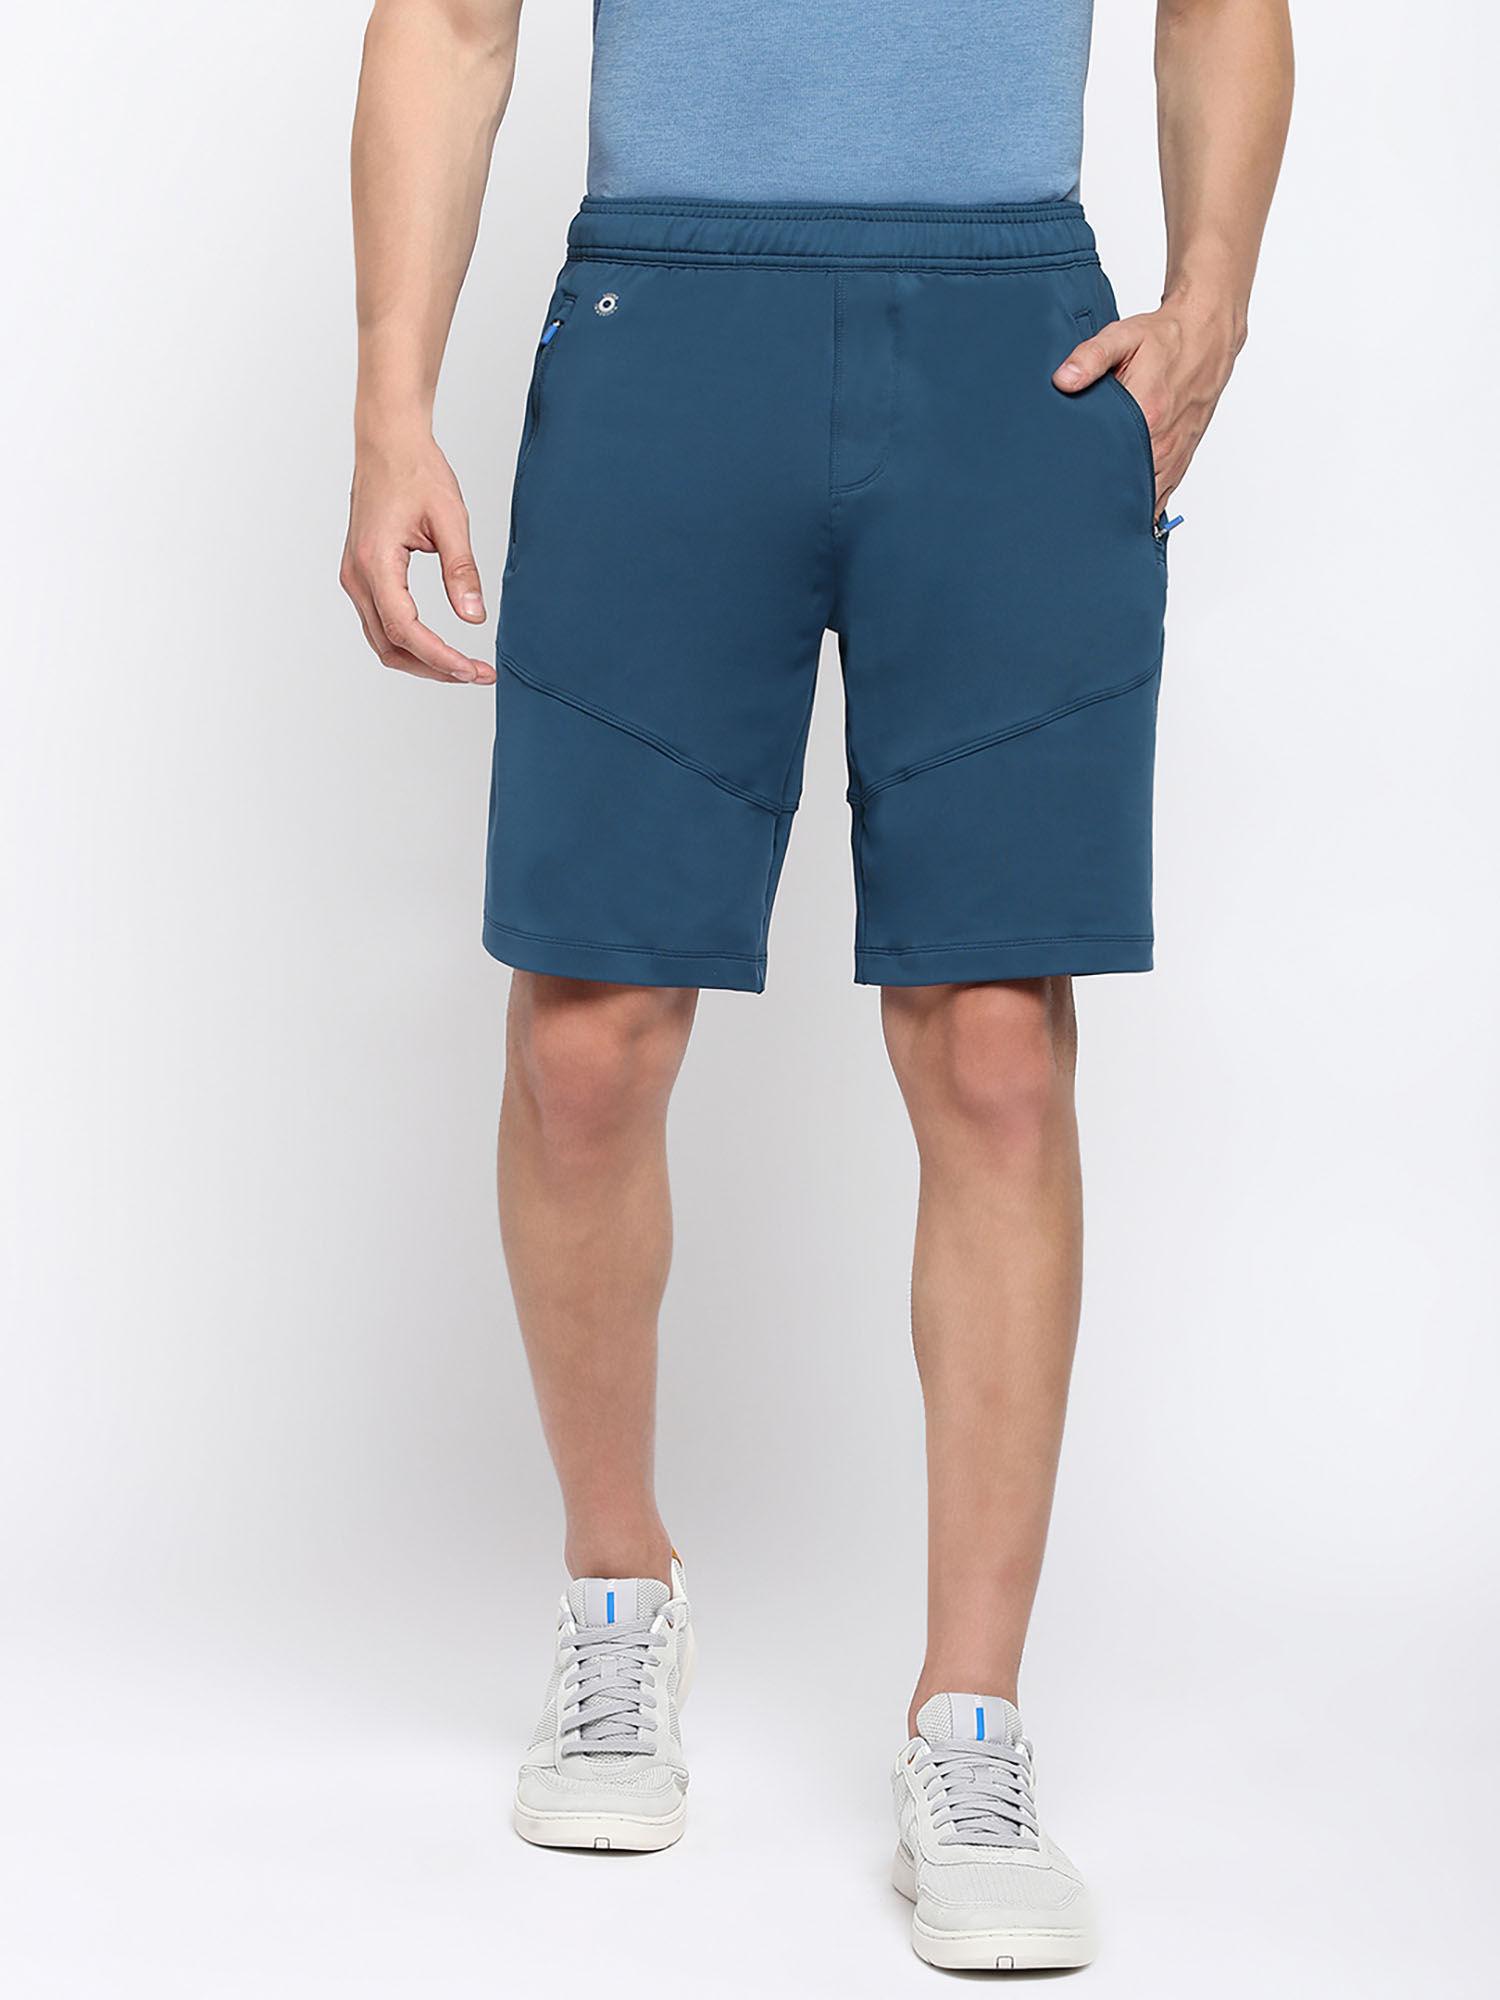 active-men-swift-dry-&-4-way-stretch-knit-shorts---bay-berry